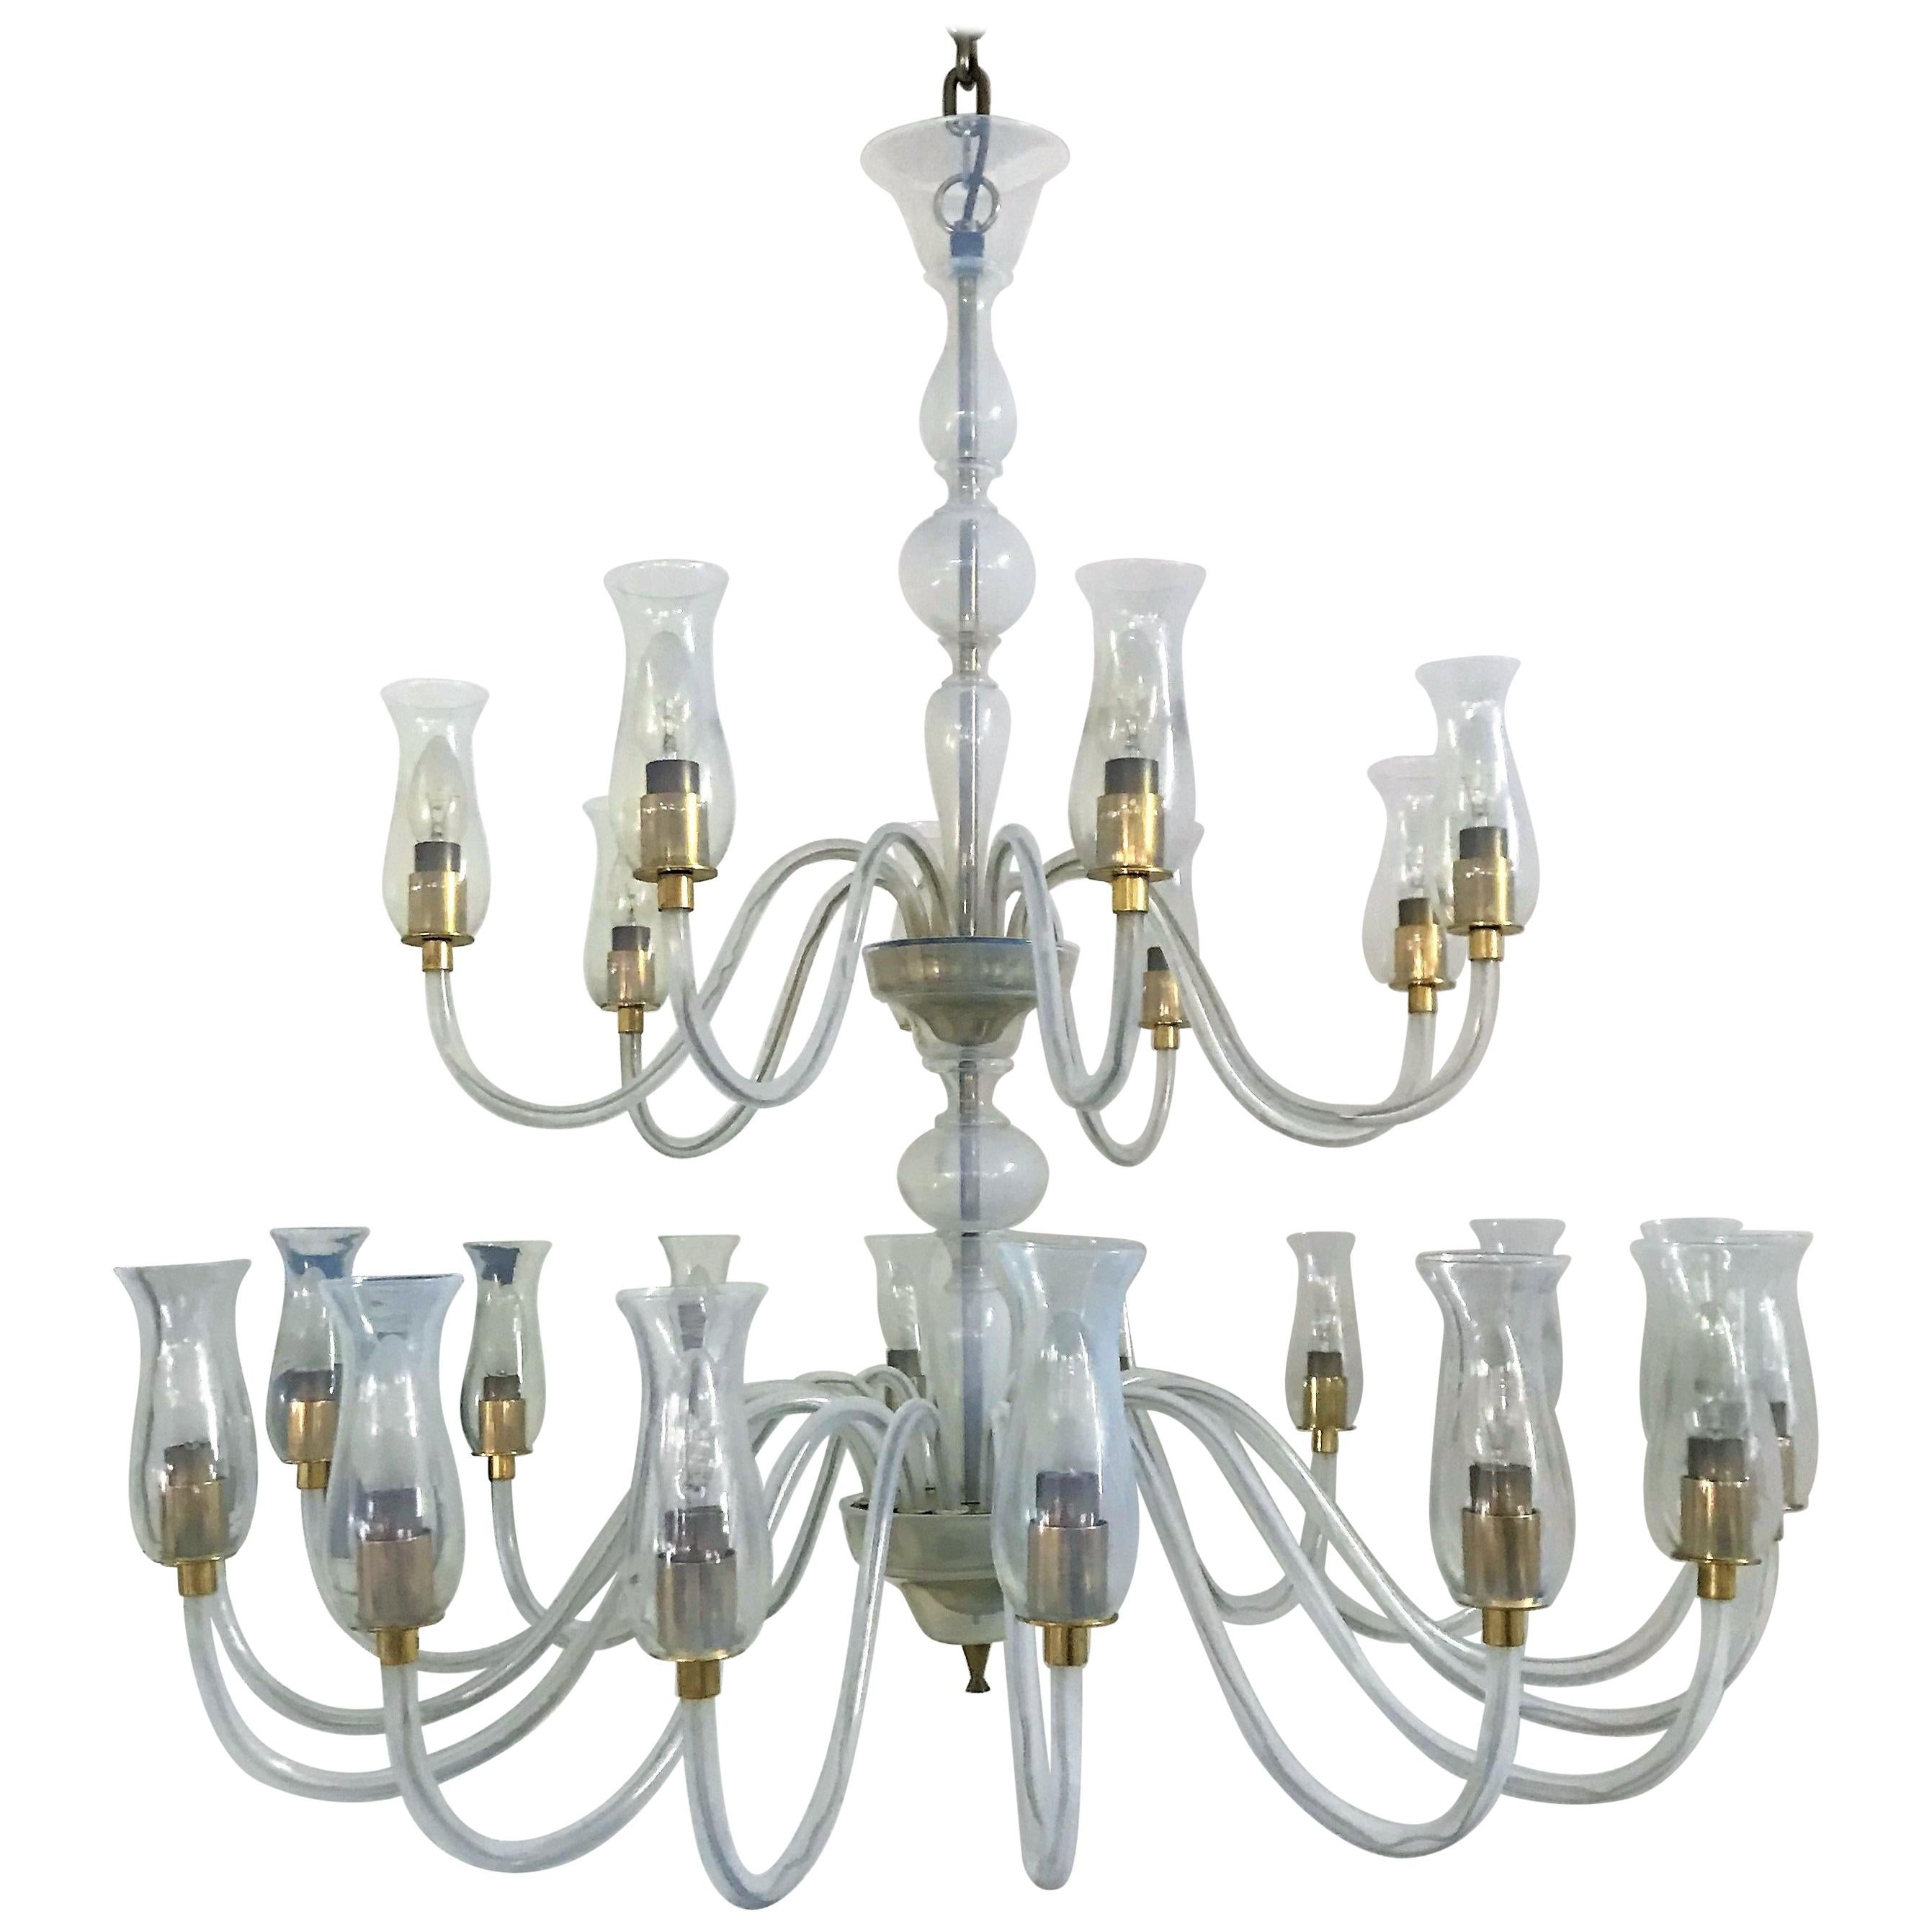 24-Light Mid Century Modern Chandelier by Cenedese in Murano Glass, circa 1970